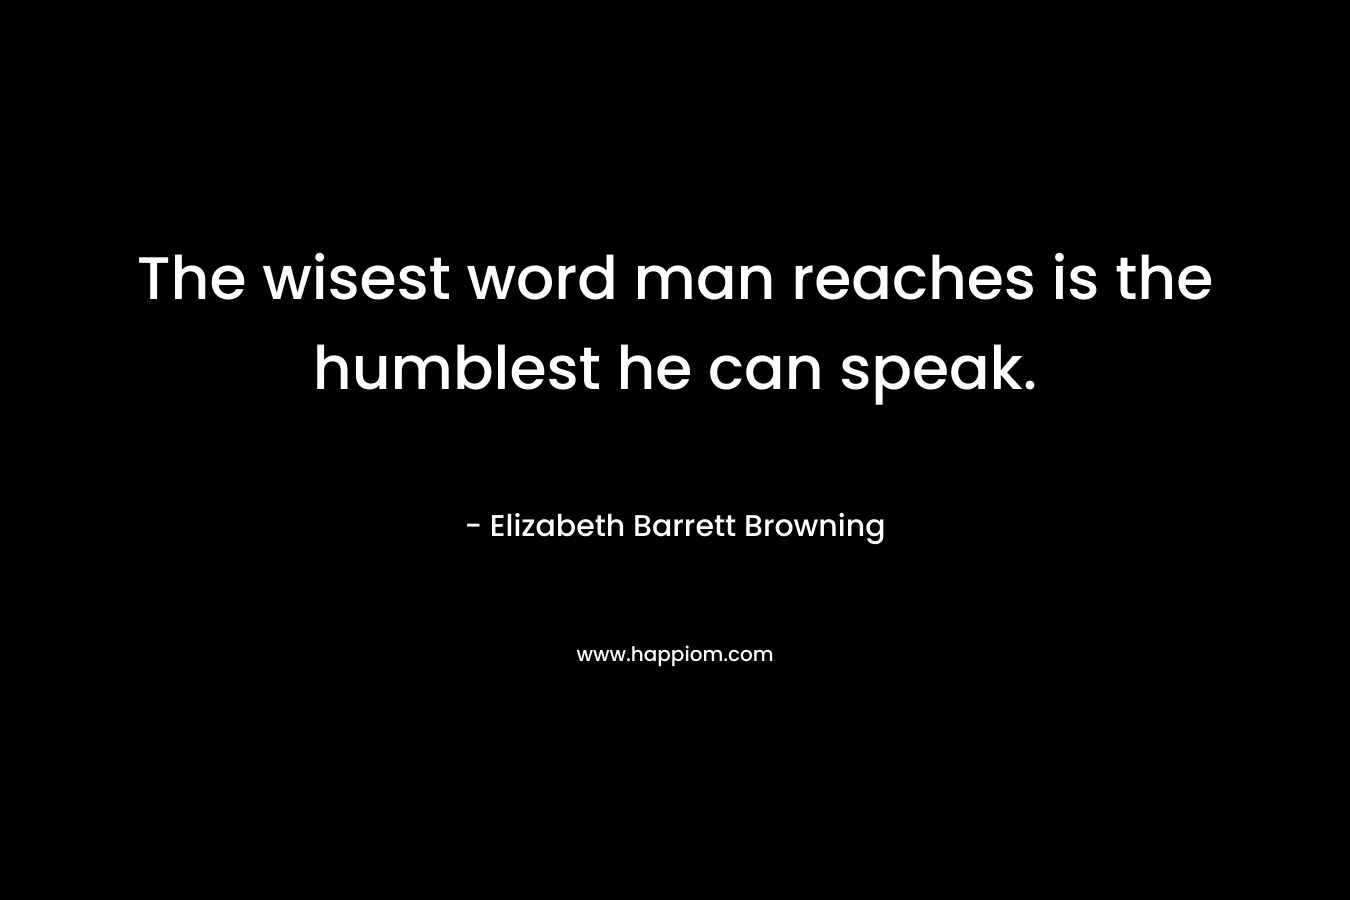 The wisest word man reaches is the humblest he can speak. – Elizabeth Barrett Browning